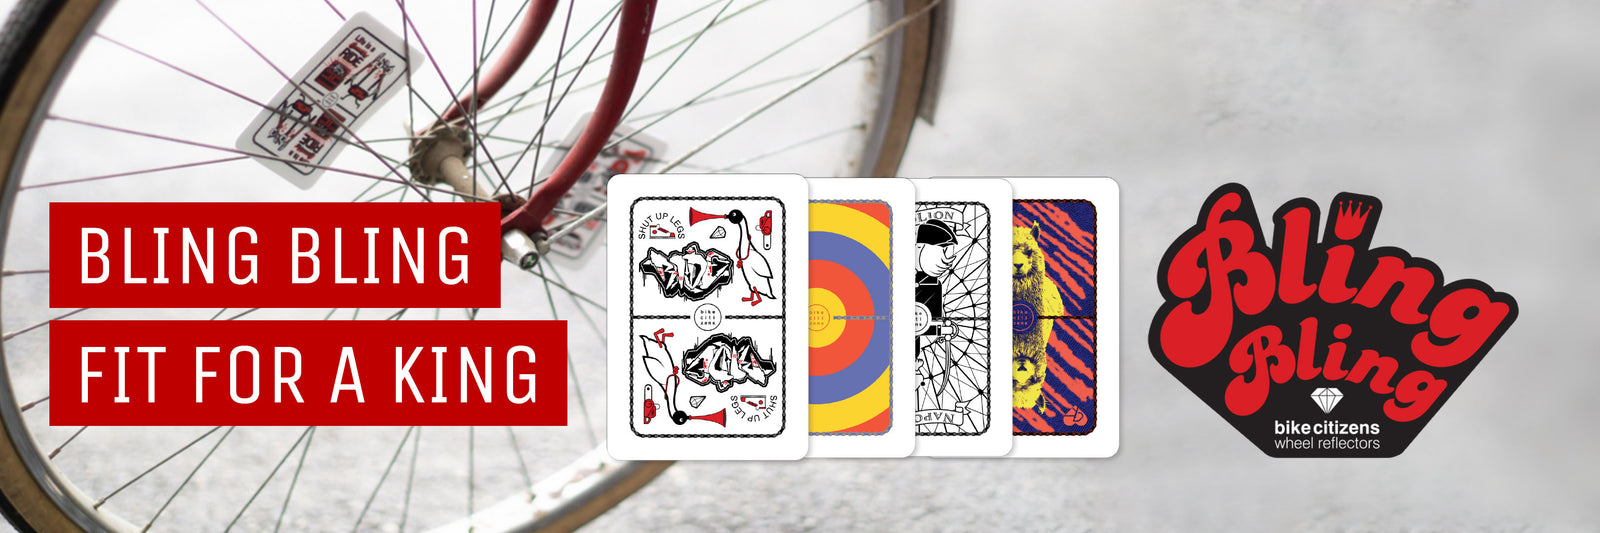 Create A Rider Identity With Bike Citizens Spoke Cards